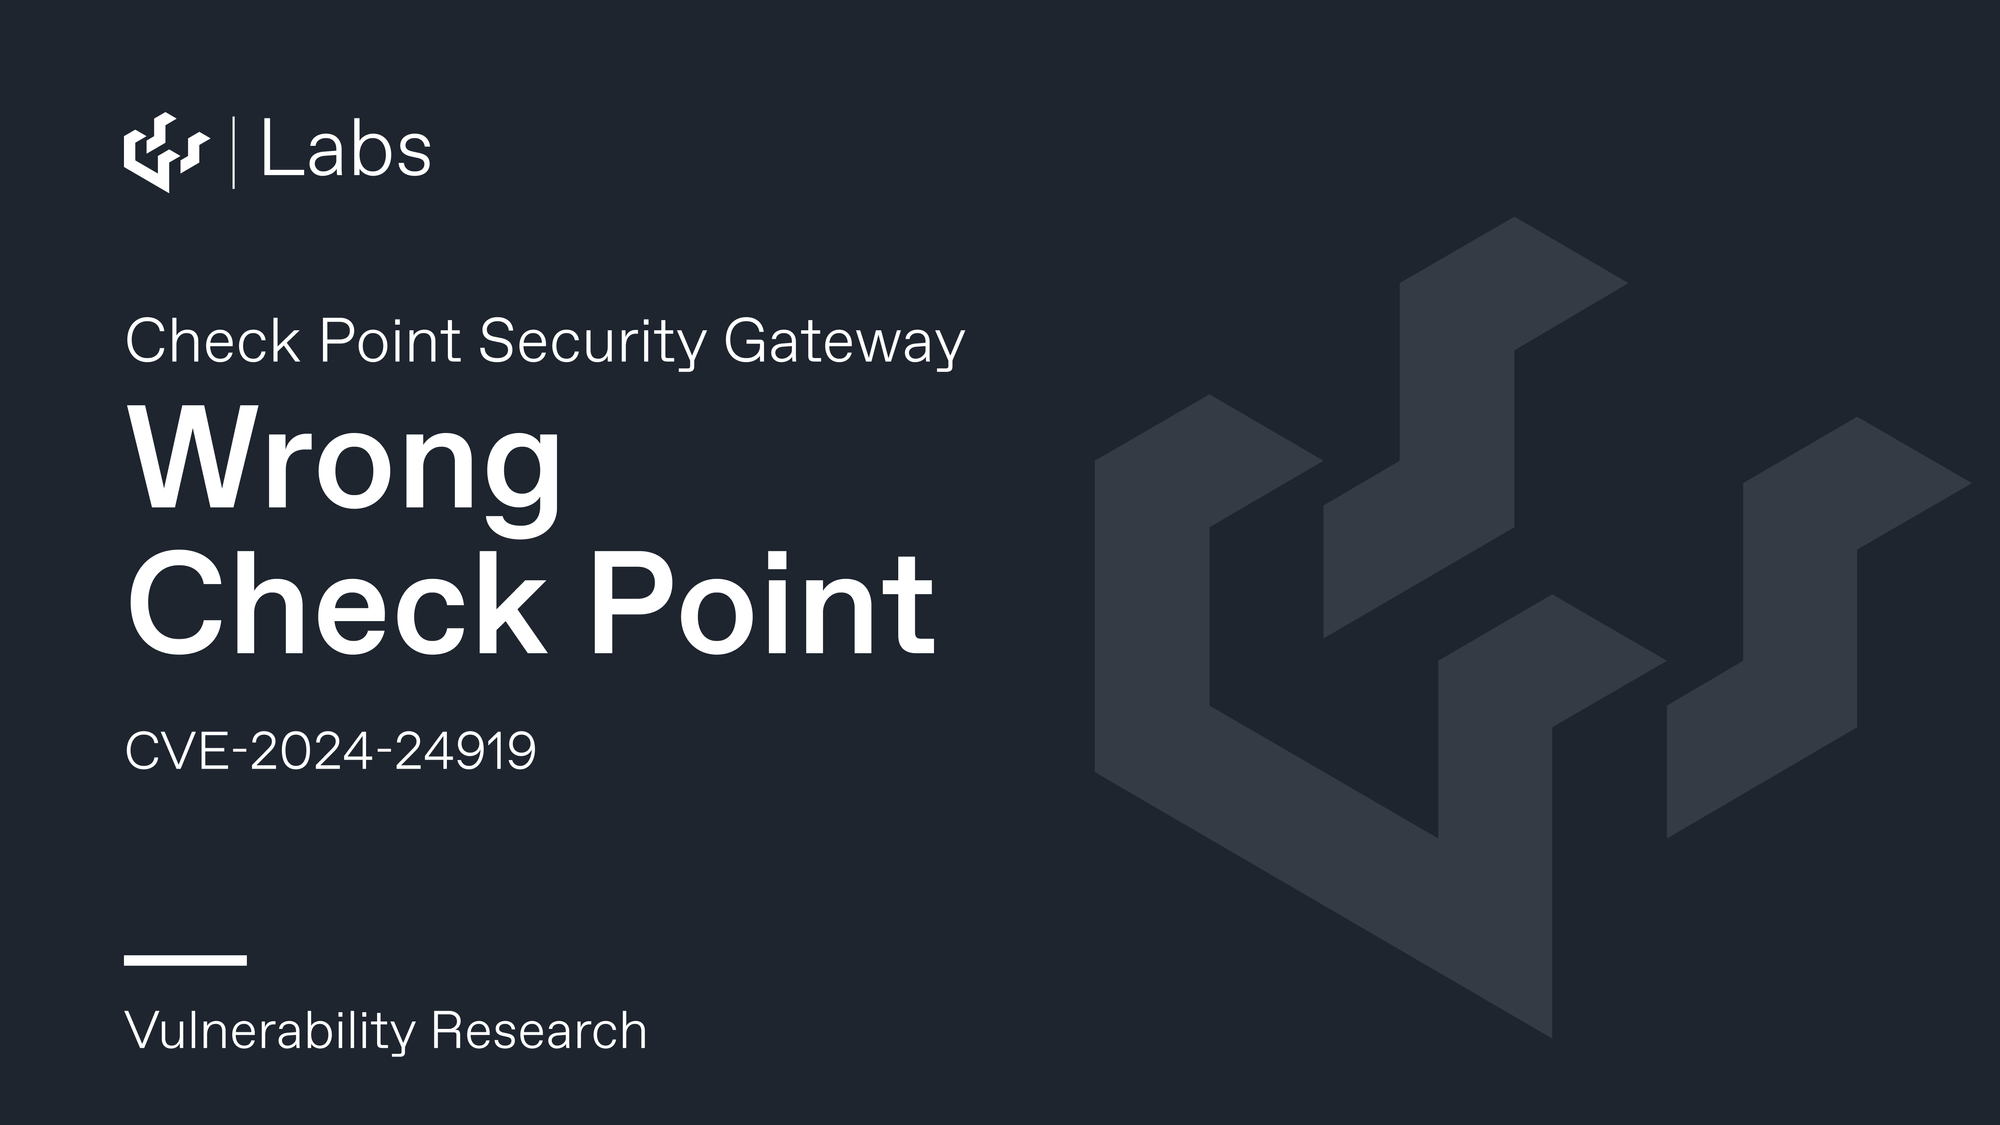 Check Point - Wrong Check Point (CVE-2024-24919)